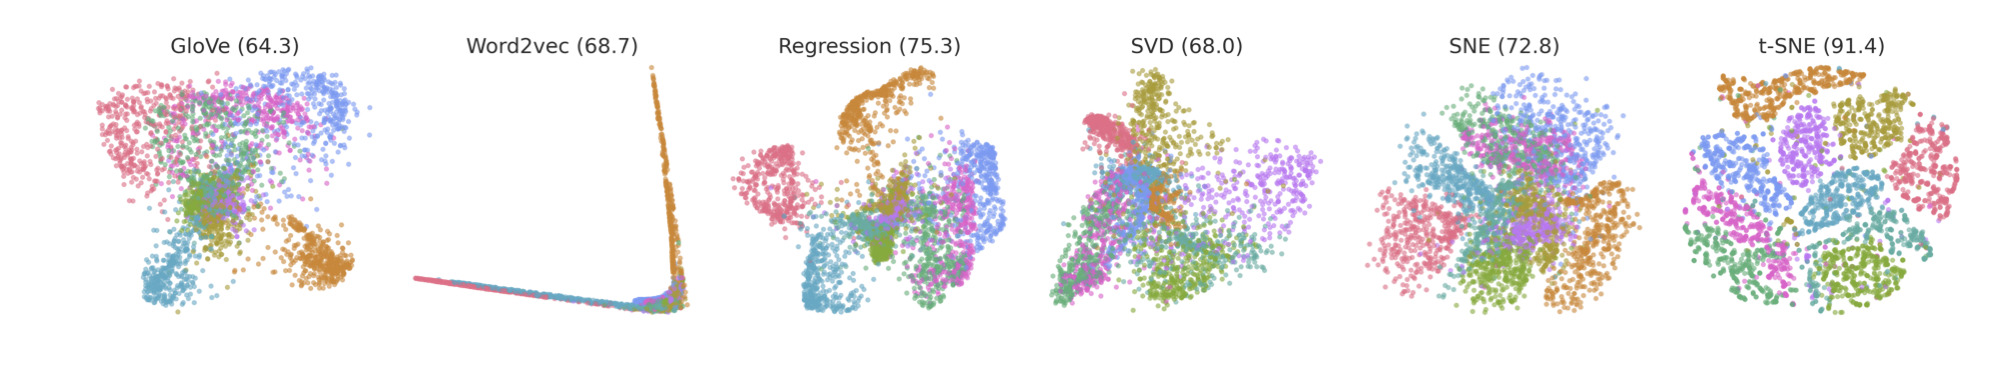 Our theory says that word embedding algorithms can be understood as manifold learning methods. Empirical results confirm this. Here, we show dimensionality reduction using both (word embedding and manifold learning) types of methods. Performance is quantified by percentage of 5-nearest neighbors sharing the same digit label. The resulting embeddings demonstrate that metric regression is highly effective at this task, outperforming metric SNE and beaten only by t-SNE (91% cluster purity), which is a visualization method specifically designed to preserve cluster separation. All word embedding methods including SVD (68%) embed the MNIST digits remarkably well and outperform classic manifold learning baselines of PCA (48%) and Isomap (49%).